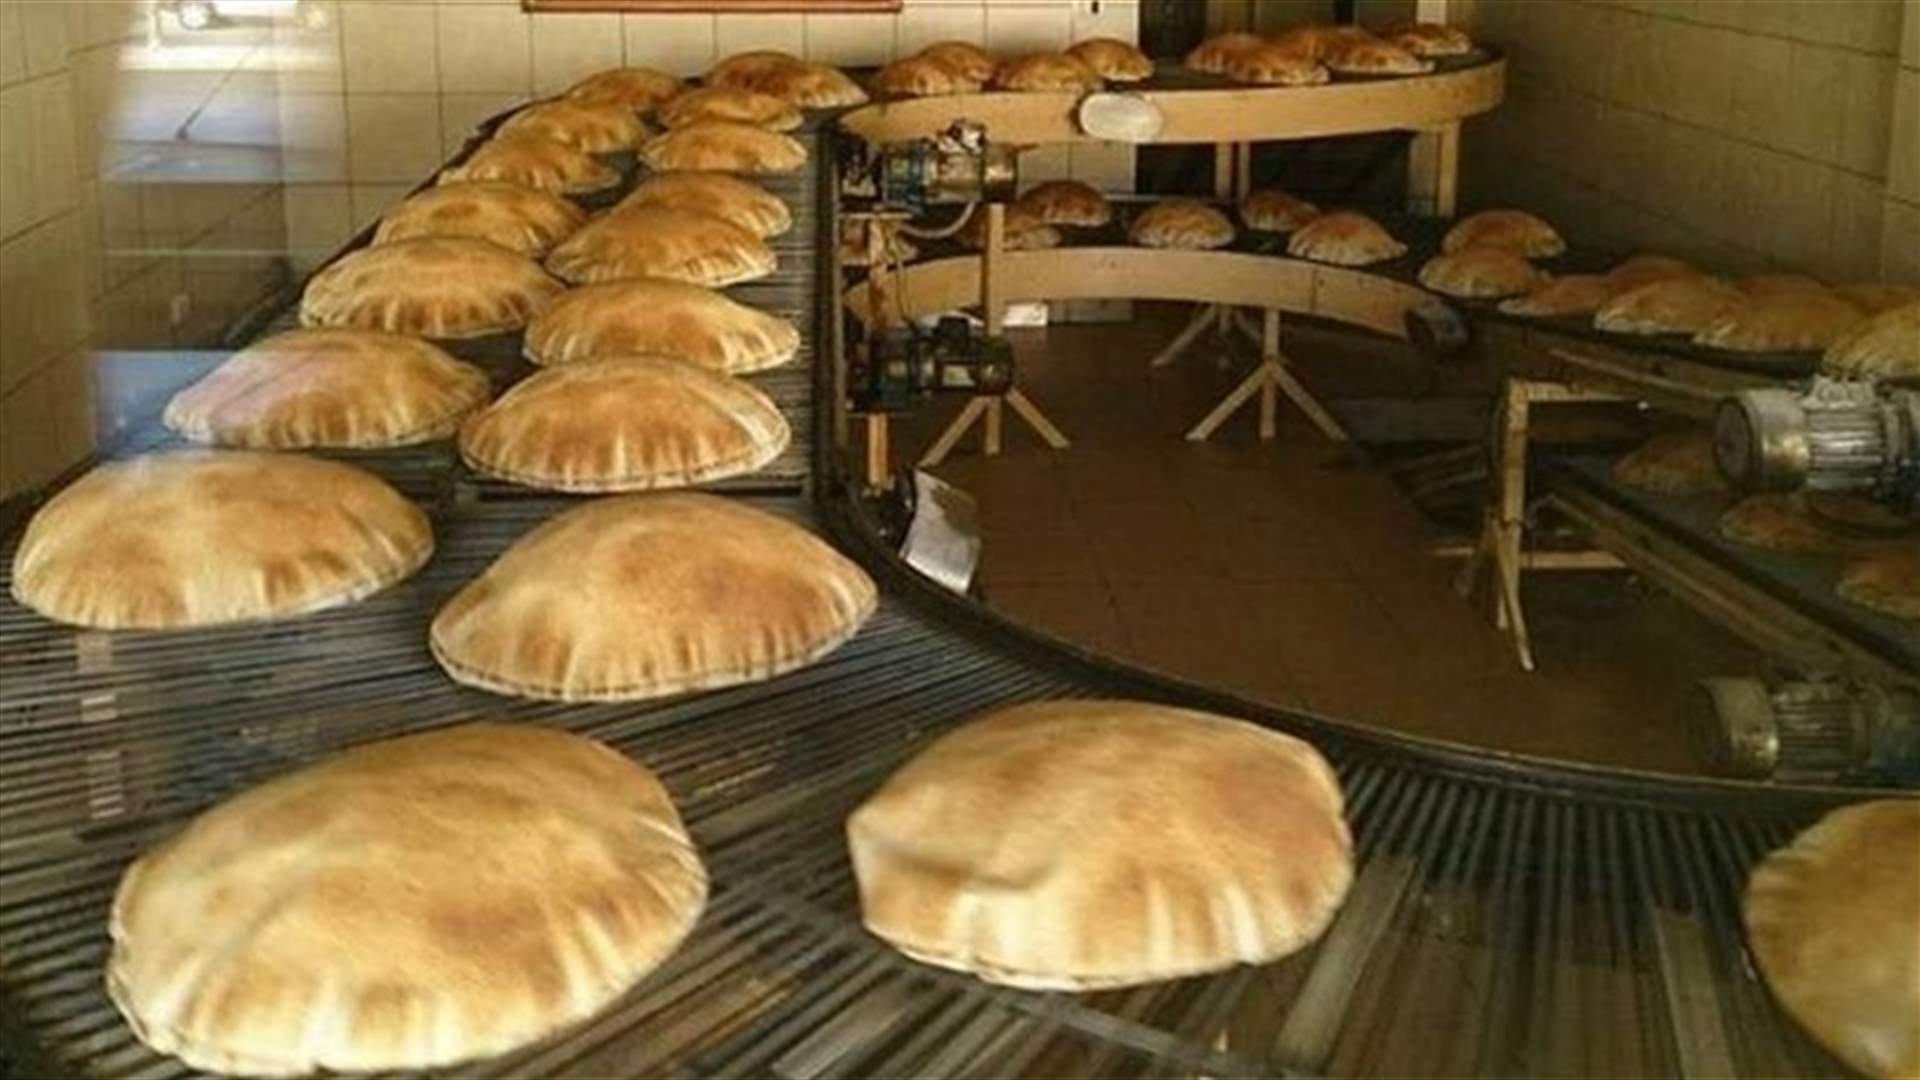 New crisis: No bread available in some bakeries today